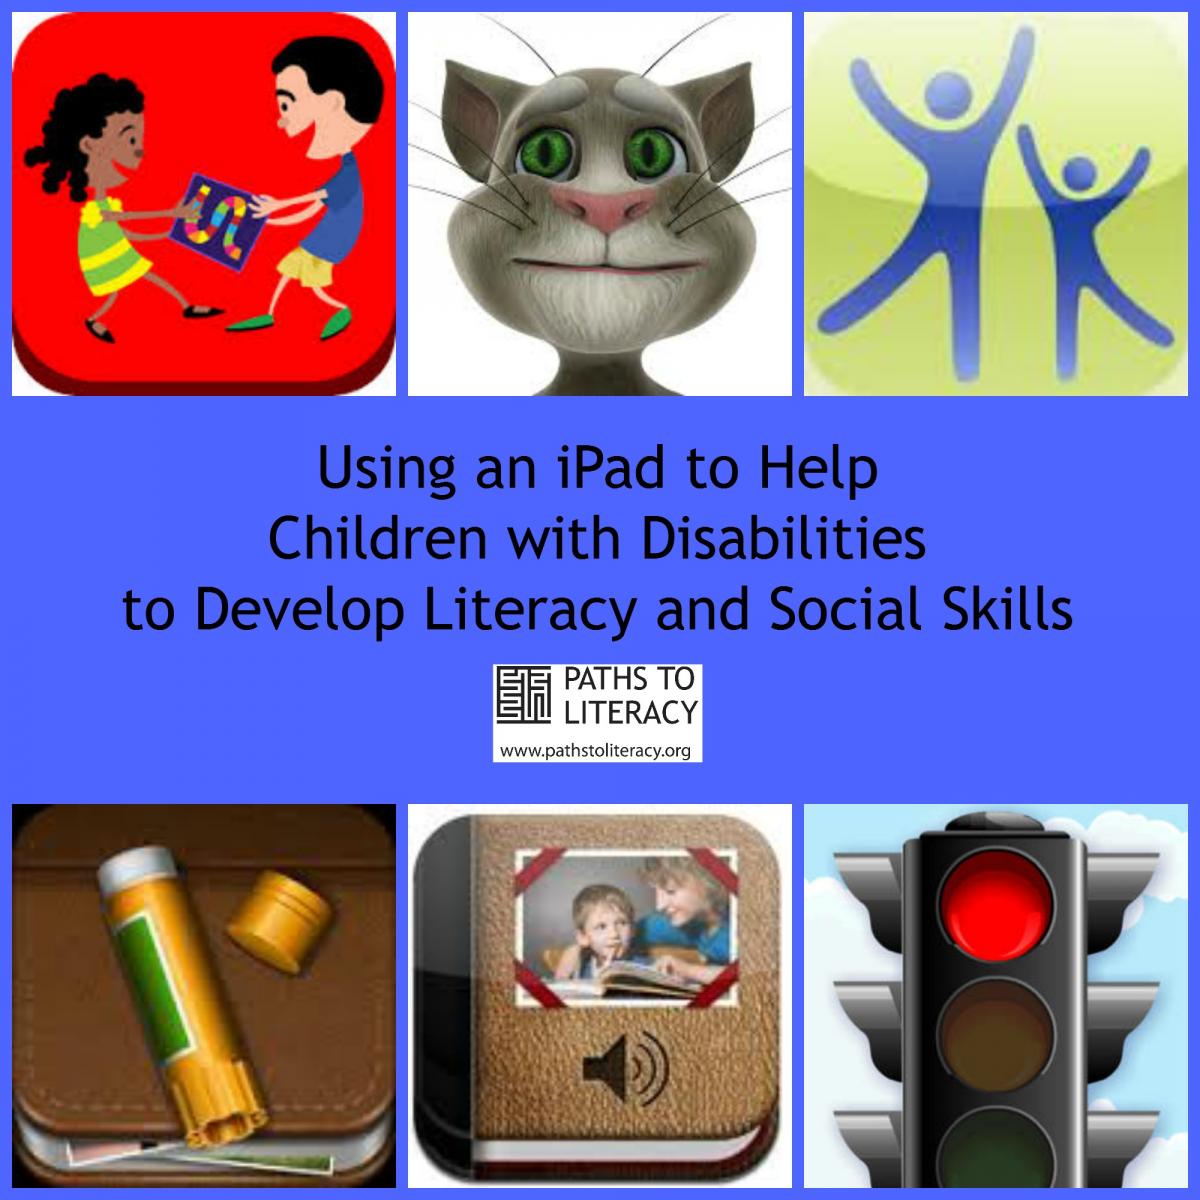 Using an iPad to help children with disabilities to develop literacy and social skills